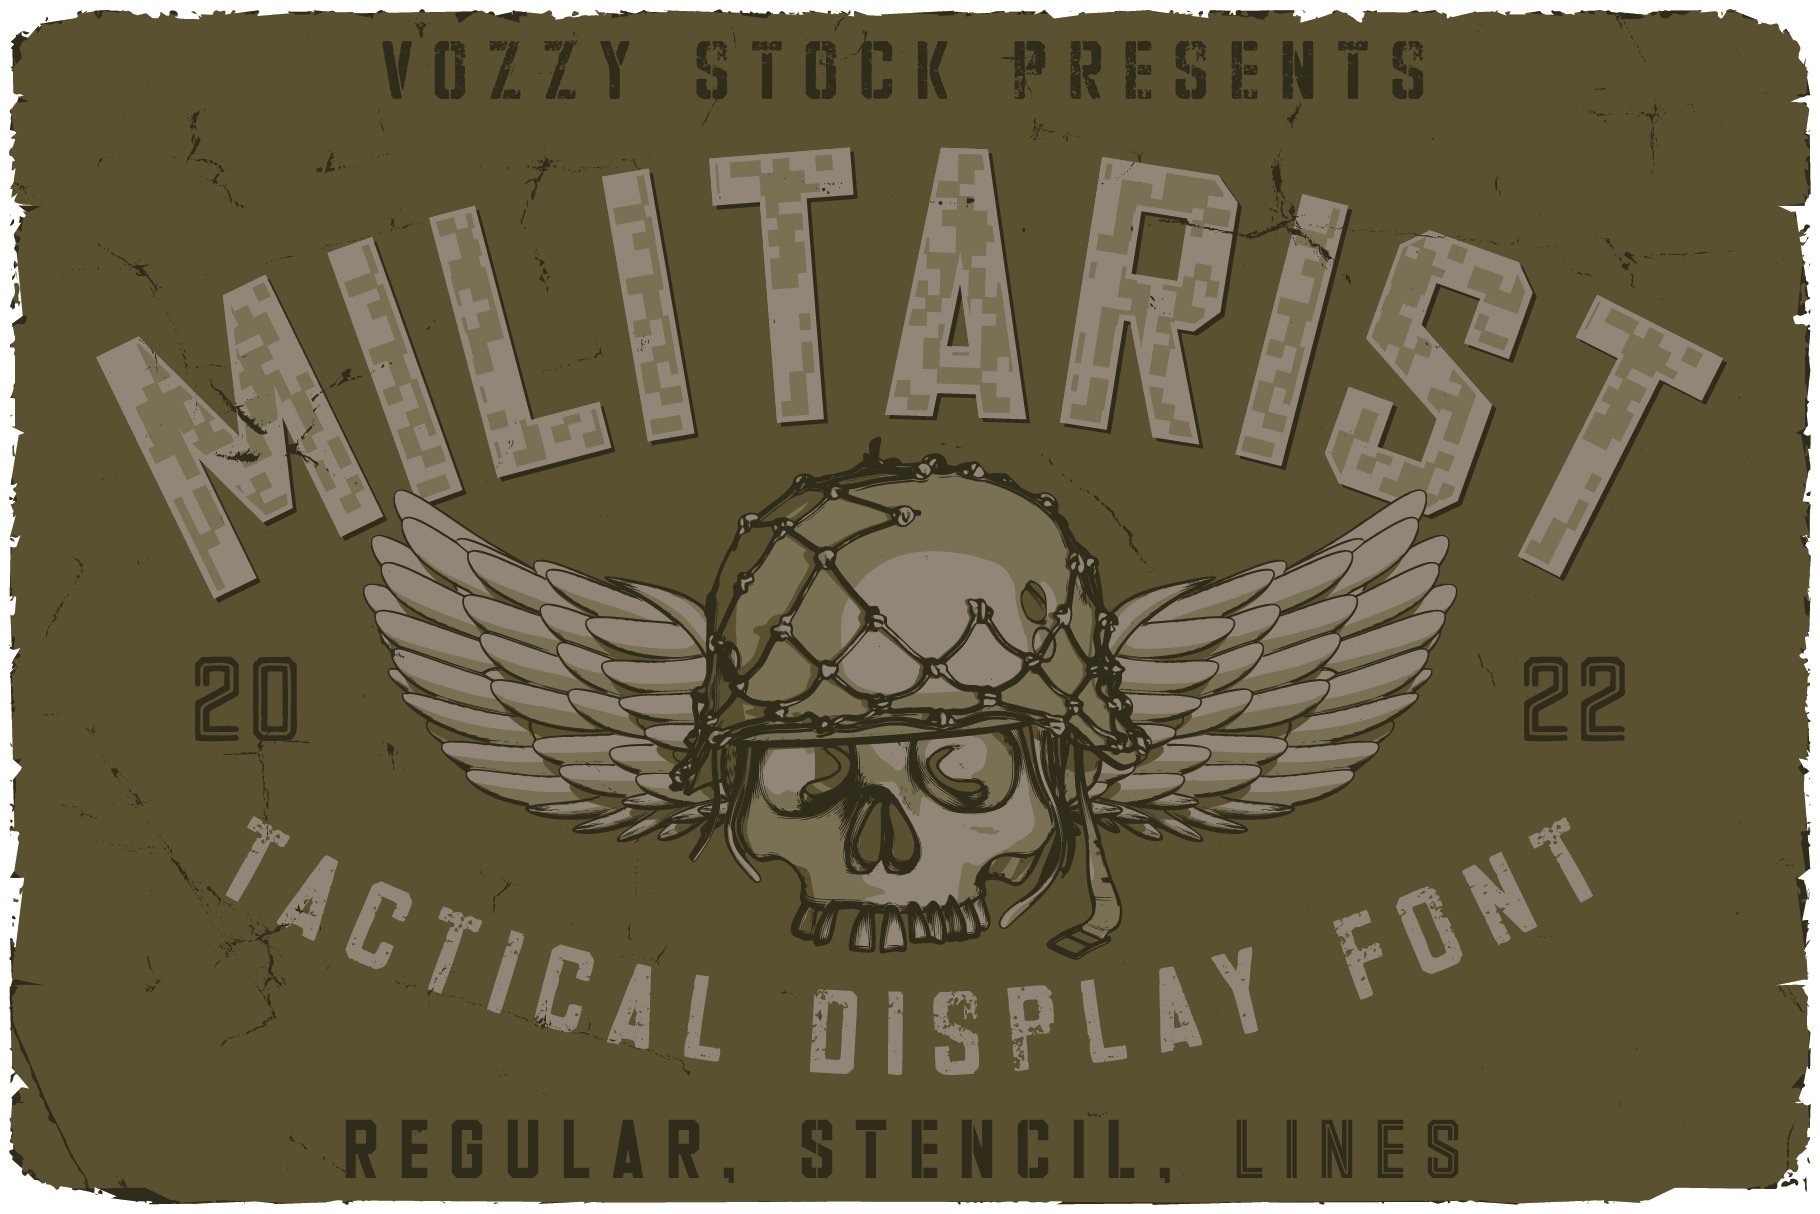 Militarist Font And Graphics cover image.